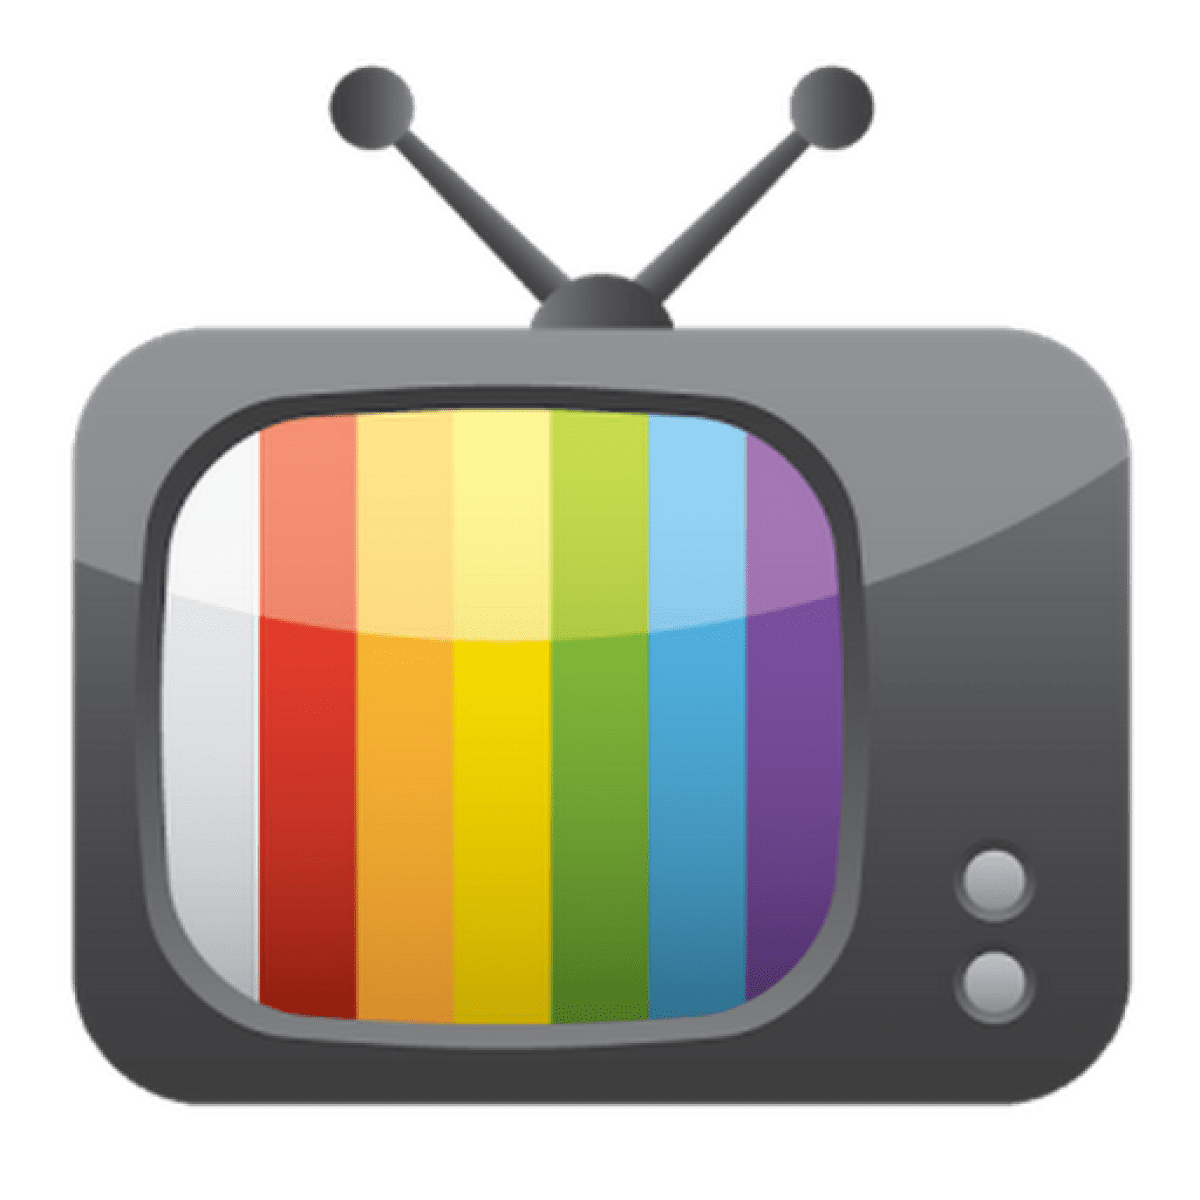 TV app for Android: IPTV Extreme Pro Paid. Enjoy live TV, movies, and shows on your Android device